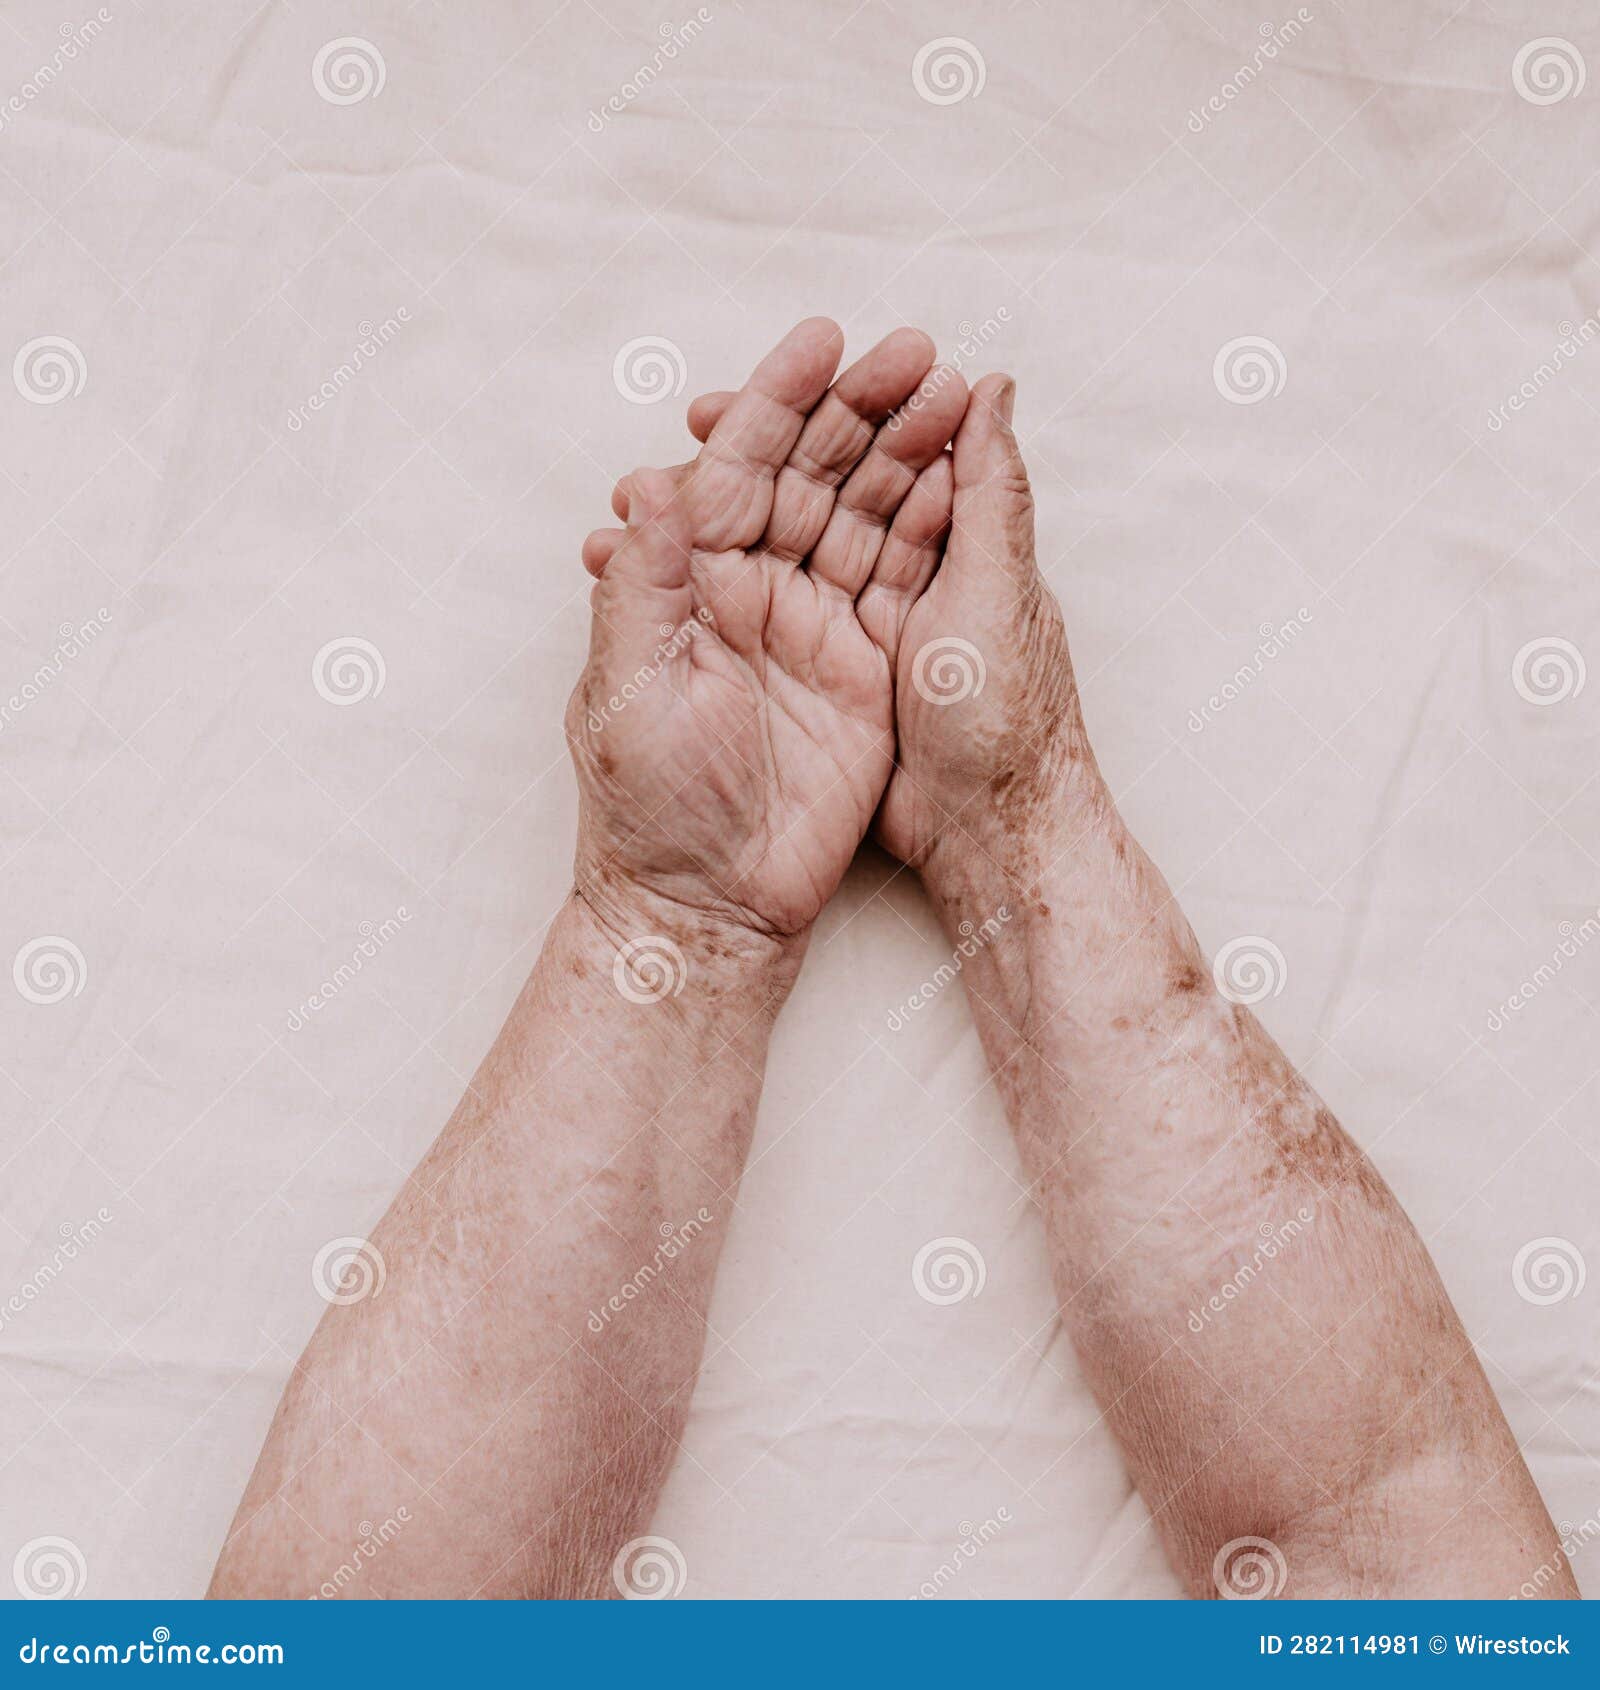 Elderly Woman S Hands are Seen Resting on a White Surface, Her Wrinkled and Aged Skin in Full View Stock Image photo